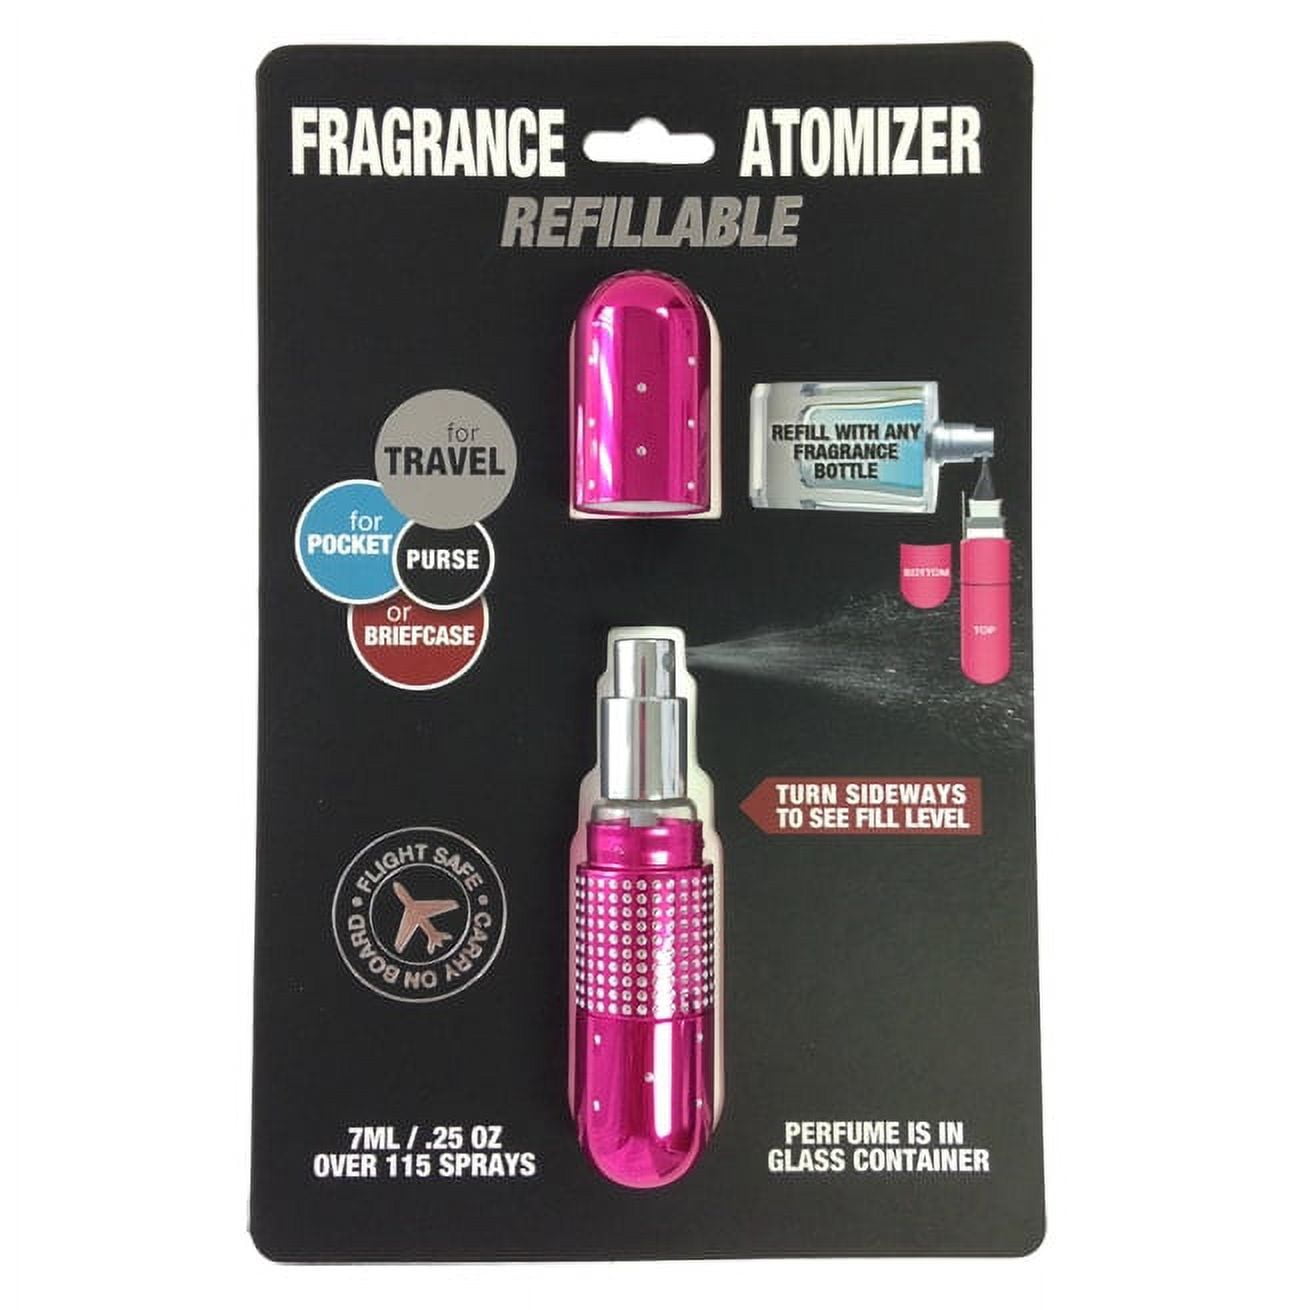 Refillable Fragrance Deluxe Crystal Sexy Pink 0.23-ounce Atomizer (Crystal Black Night)